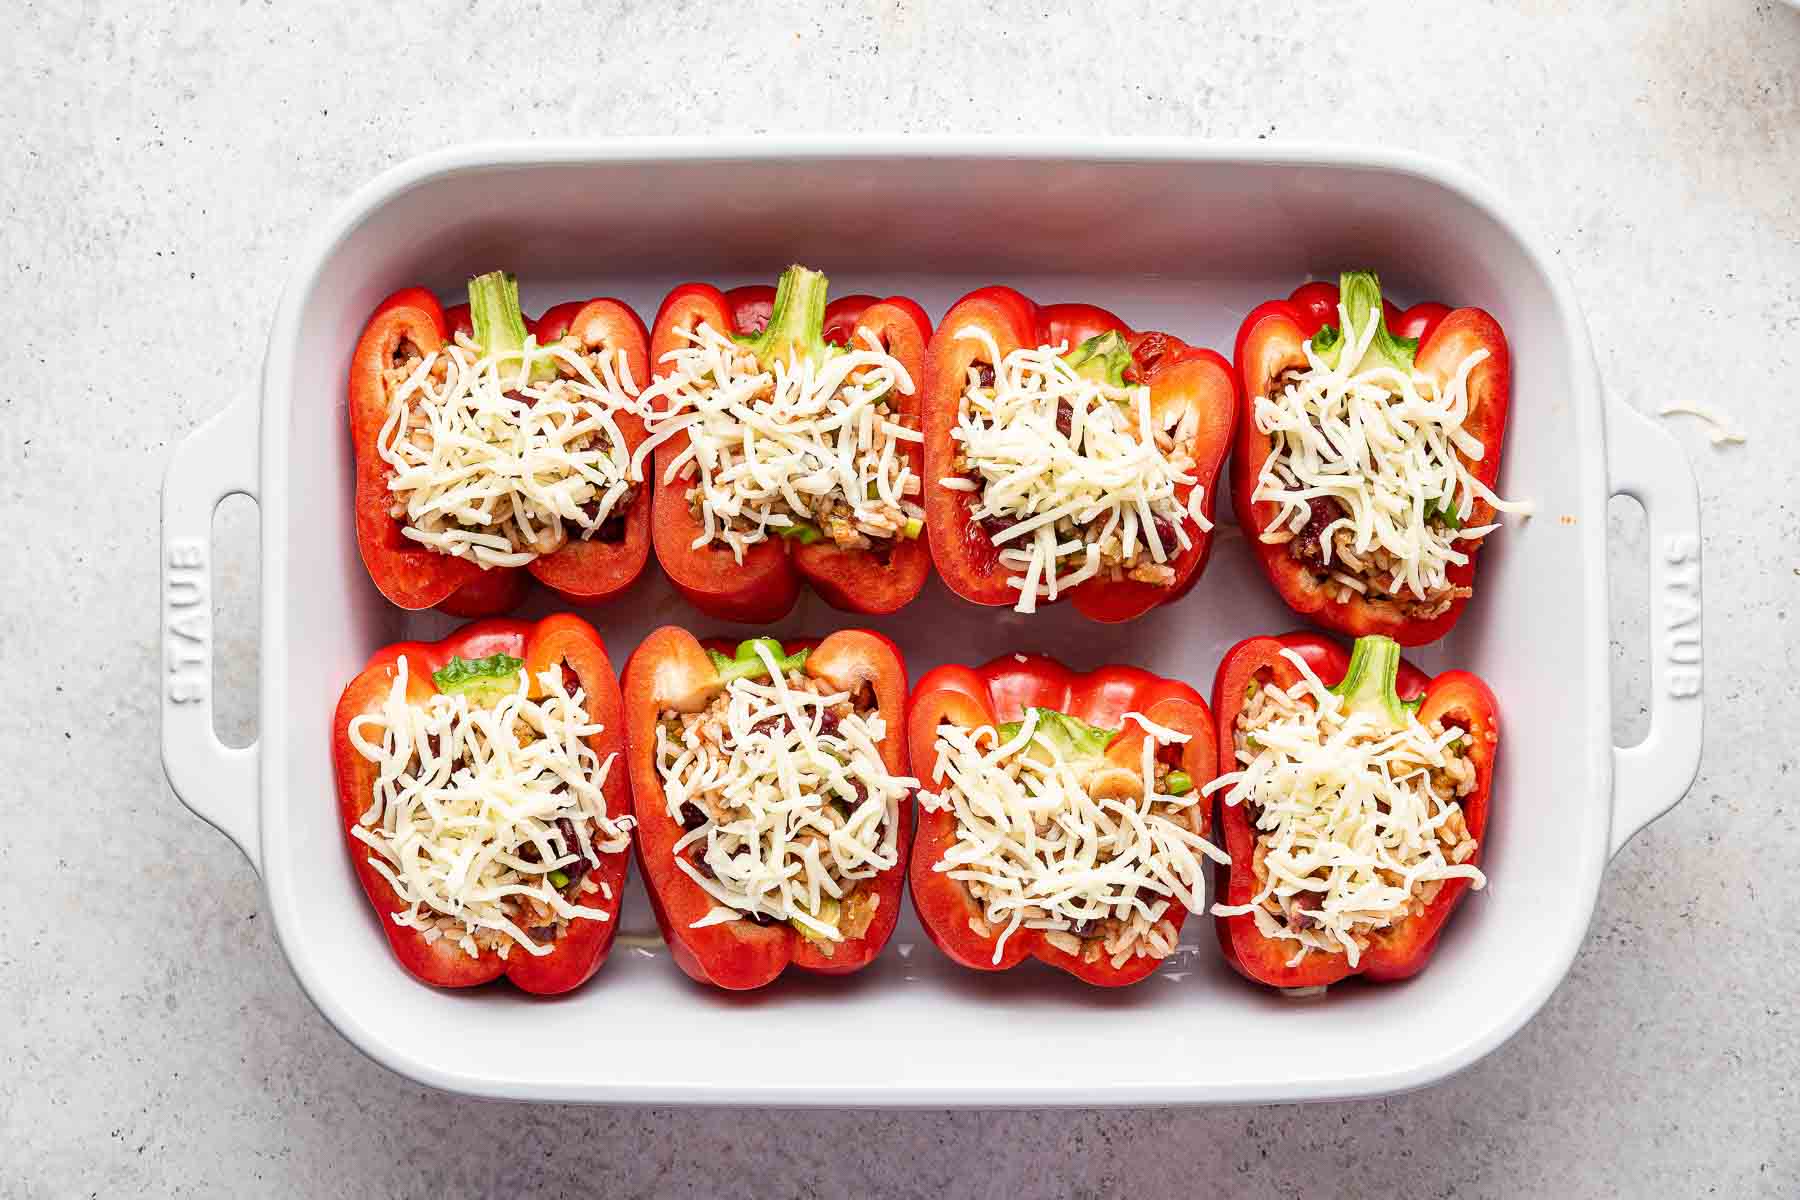 Pan of vegetarian stuffed peppers topped with cheese.